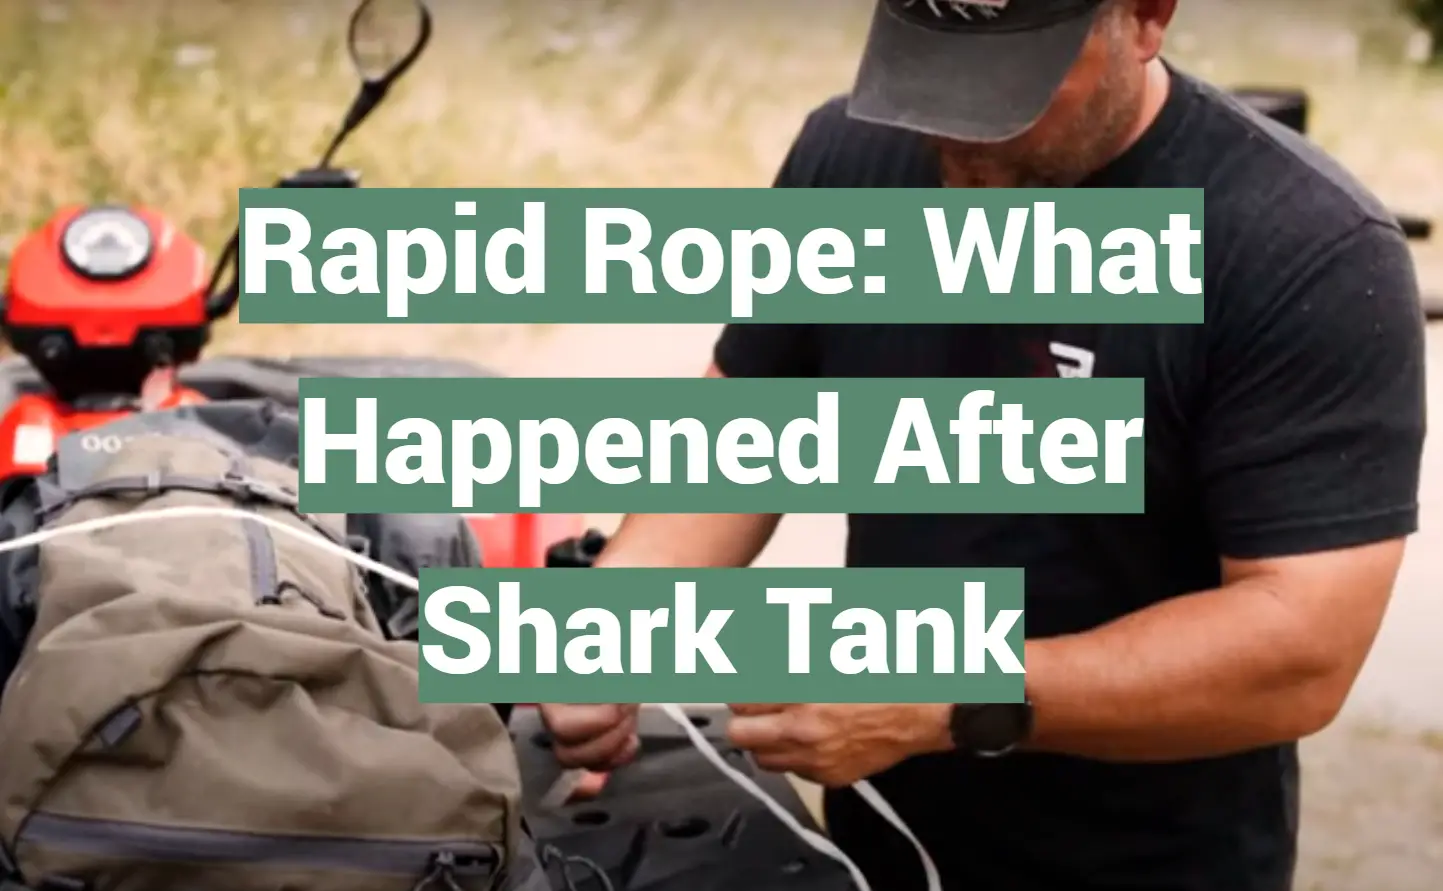 Rapid Rope: What Happened After Shark Tank